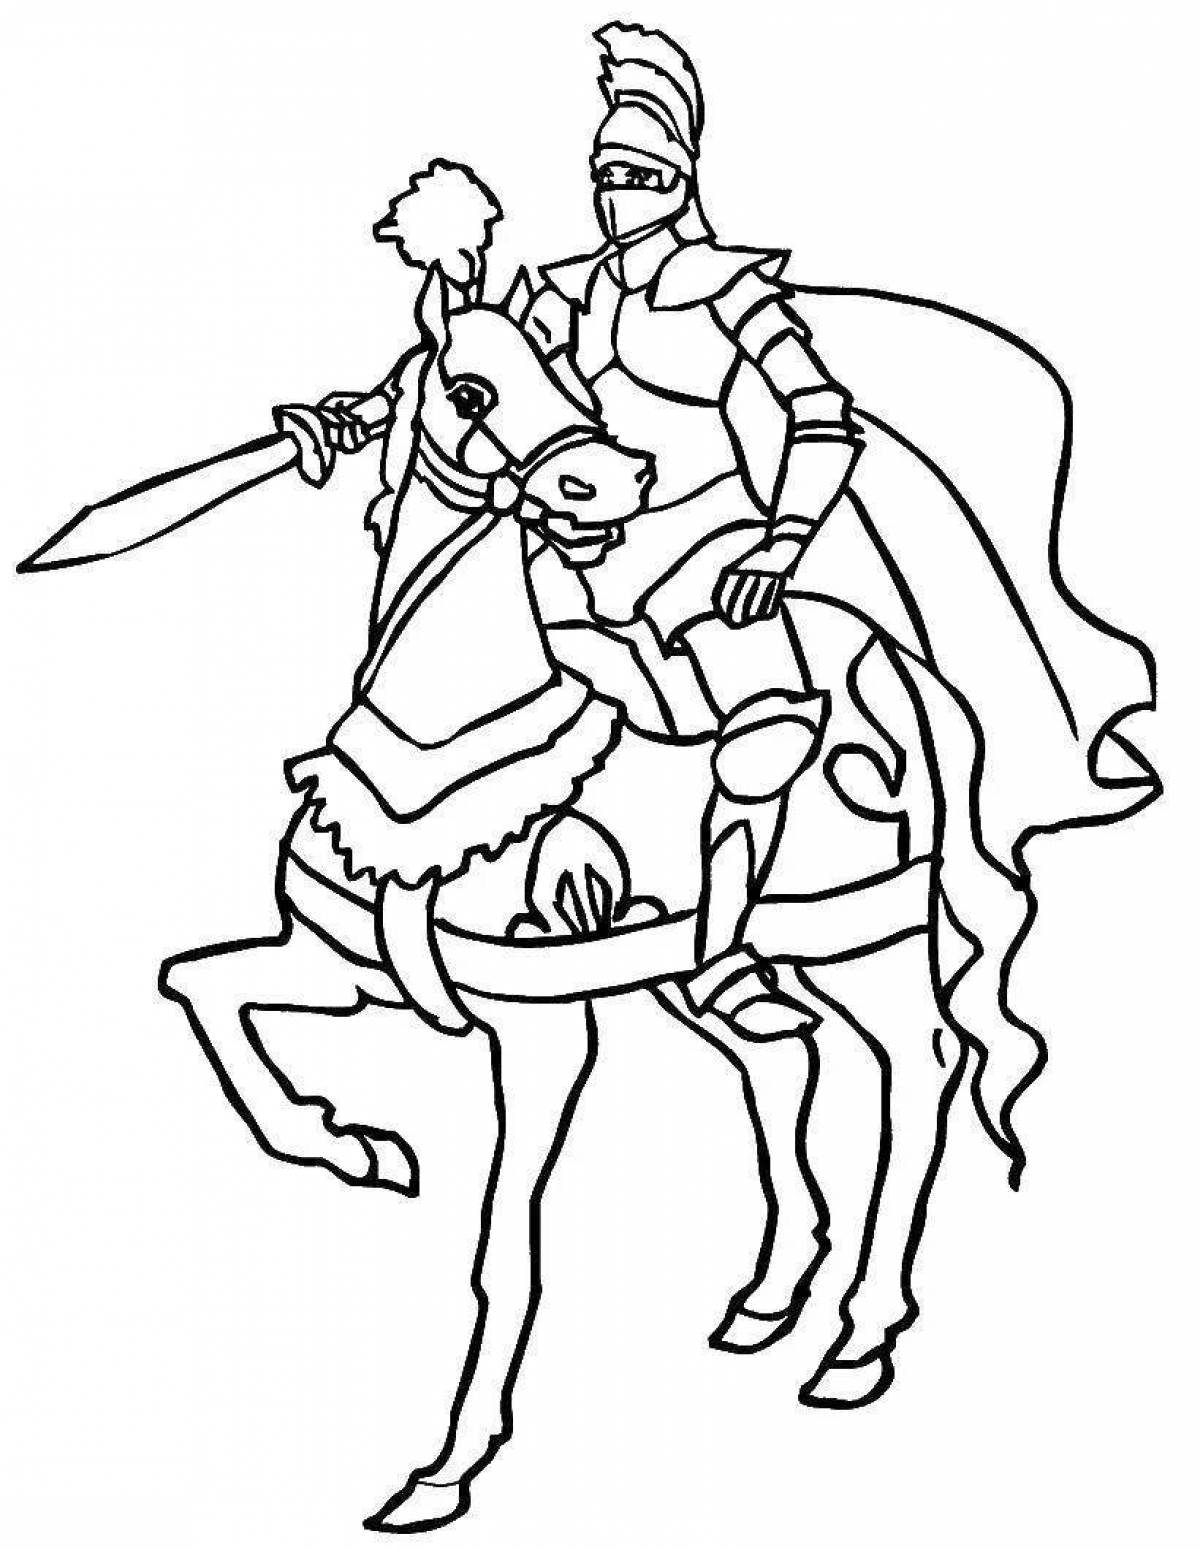 Shining coloring book for knight boys